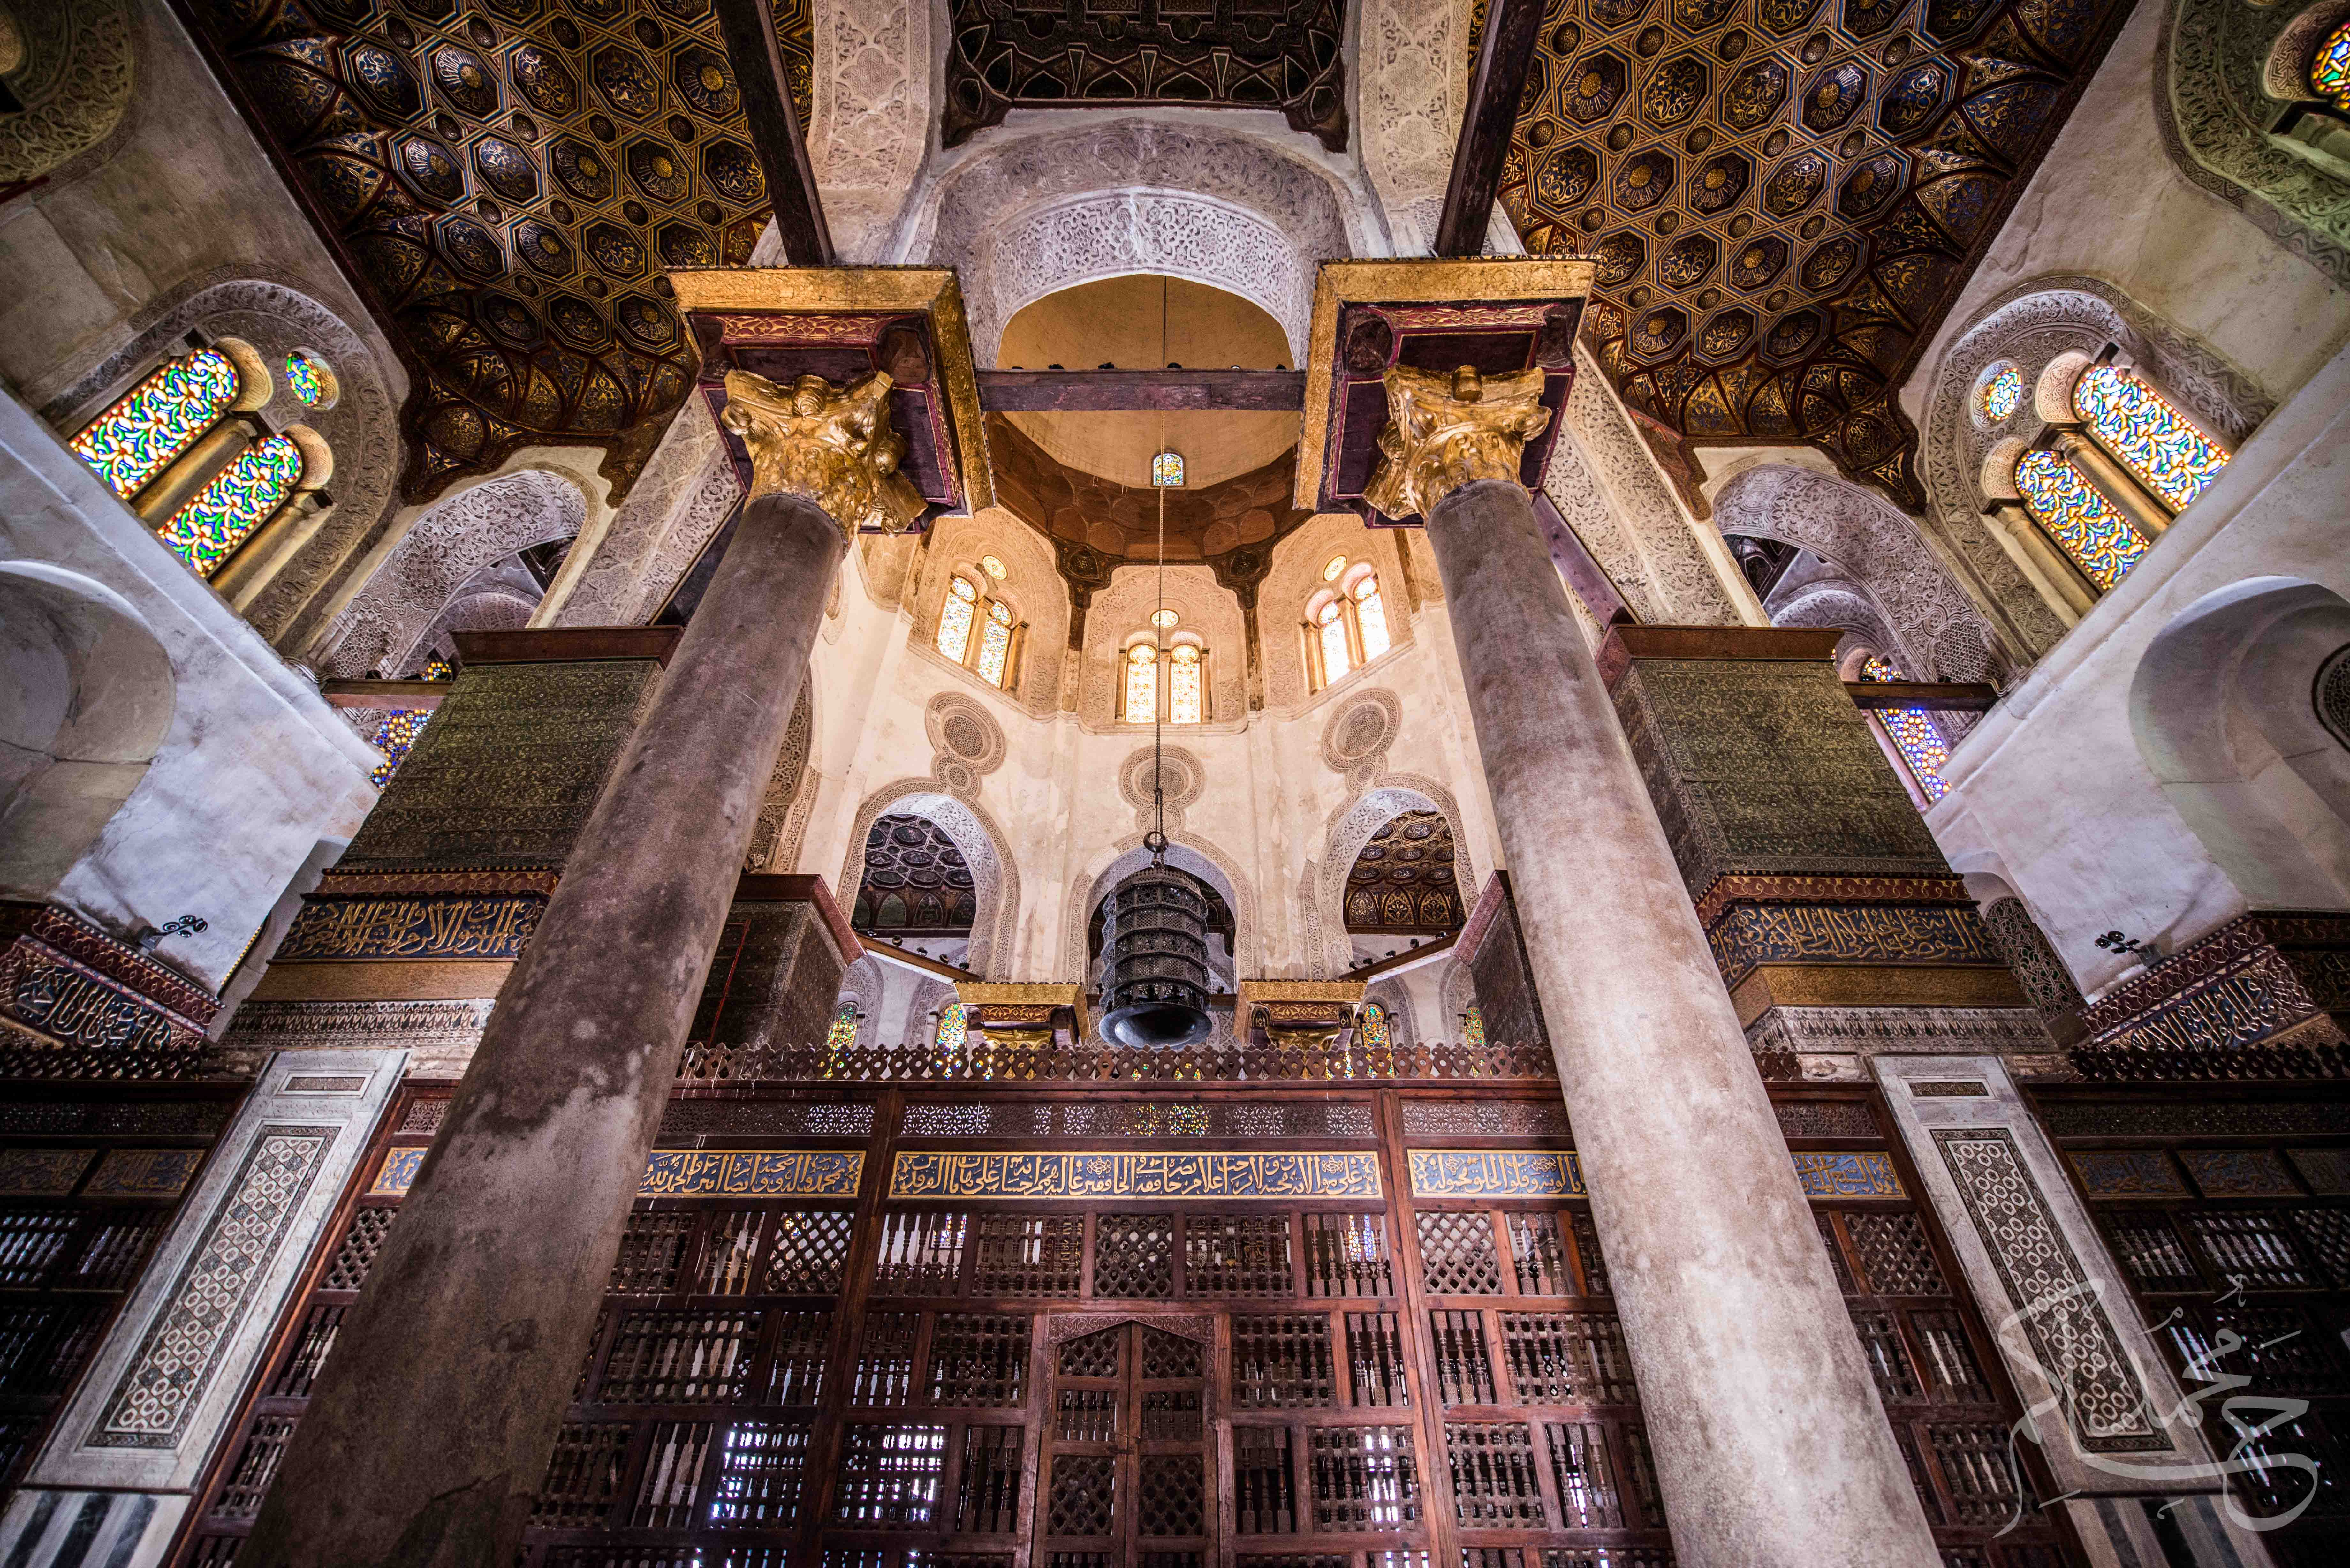 Sultan Qalawun Mosque in Old Cairo